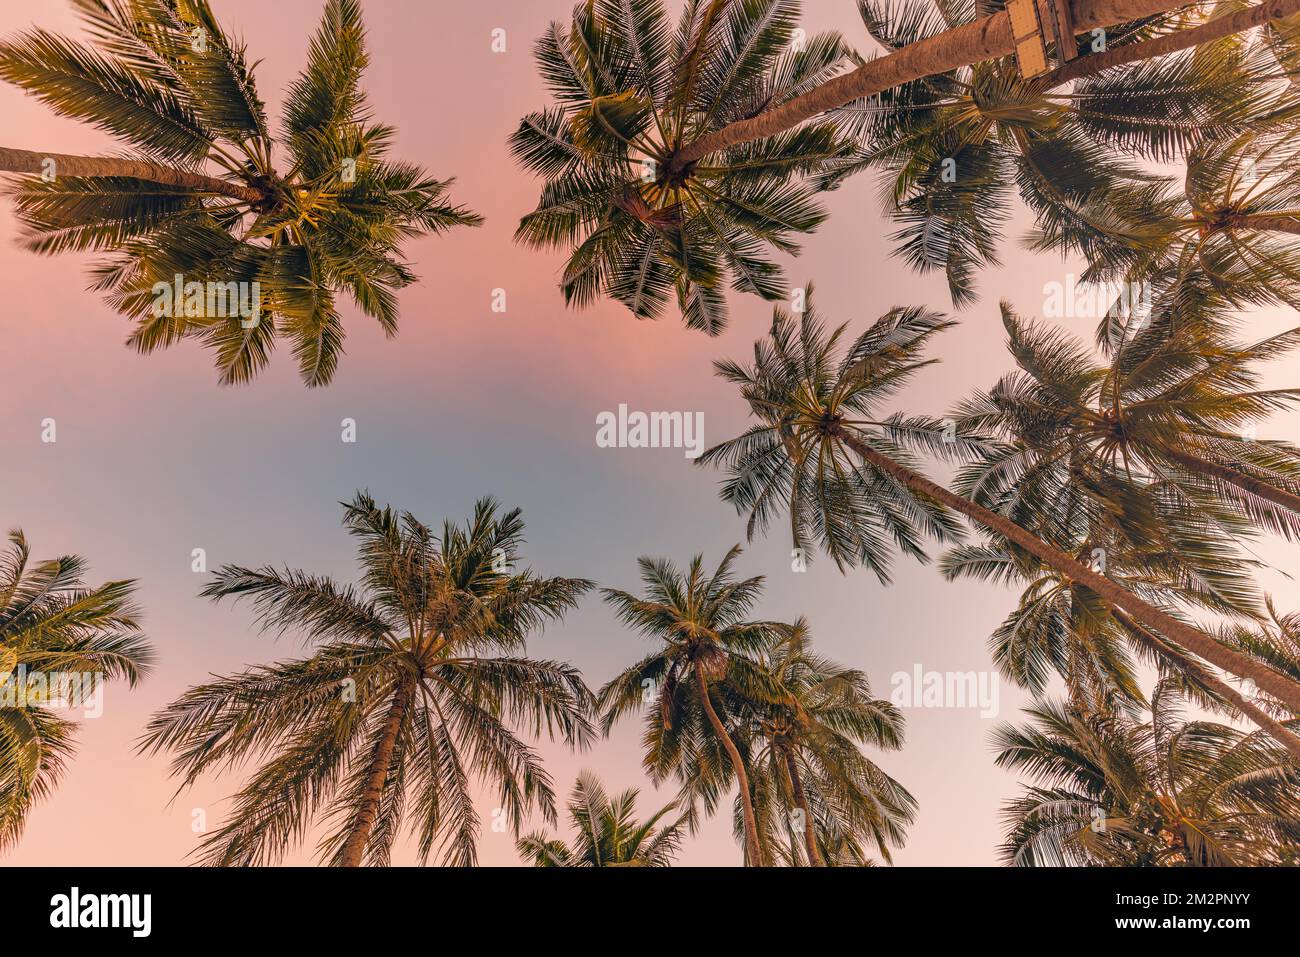 Palm trees with colorful sunset sky. Exotic tropical nature pattern, low point of view landscape. Peaceful and inspirational island scenic, silhouette Stock Photo